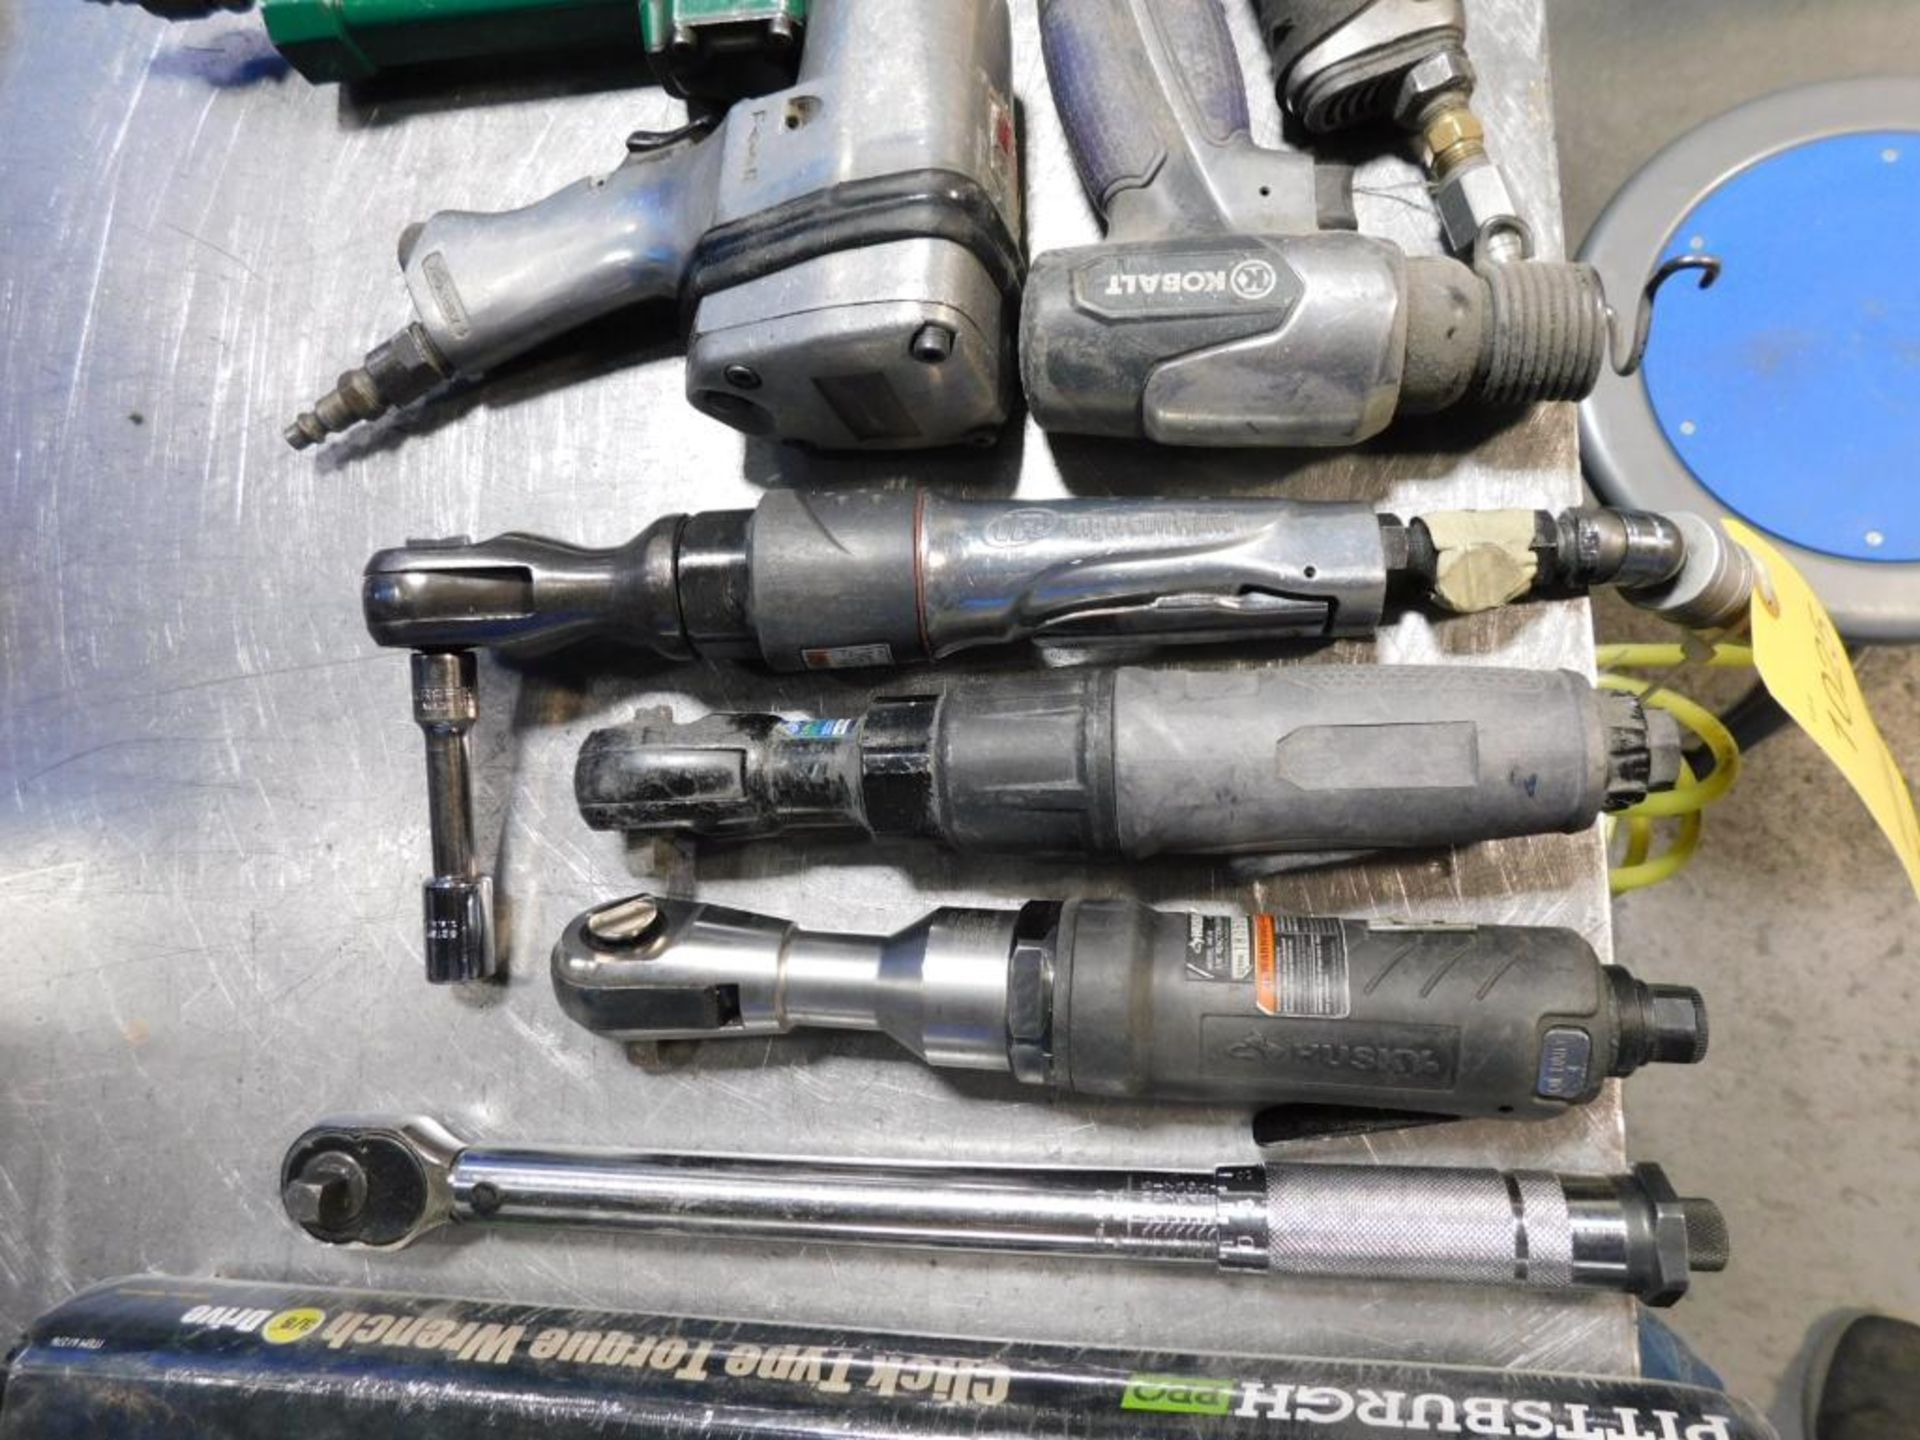 LOT: Assorted Pnuematic Ratchets, Impacts, Chisels, Torque Wrenches - Image 3 of 5